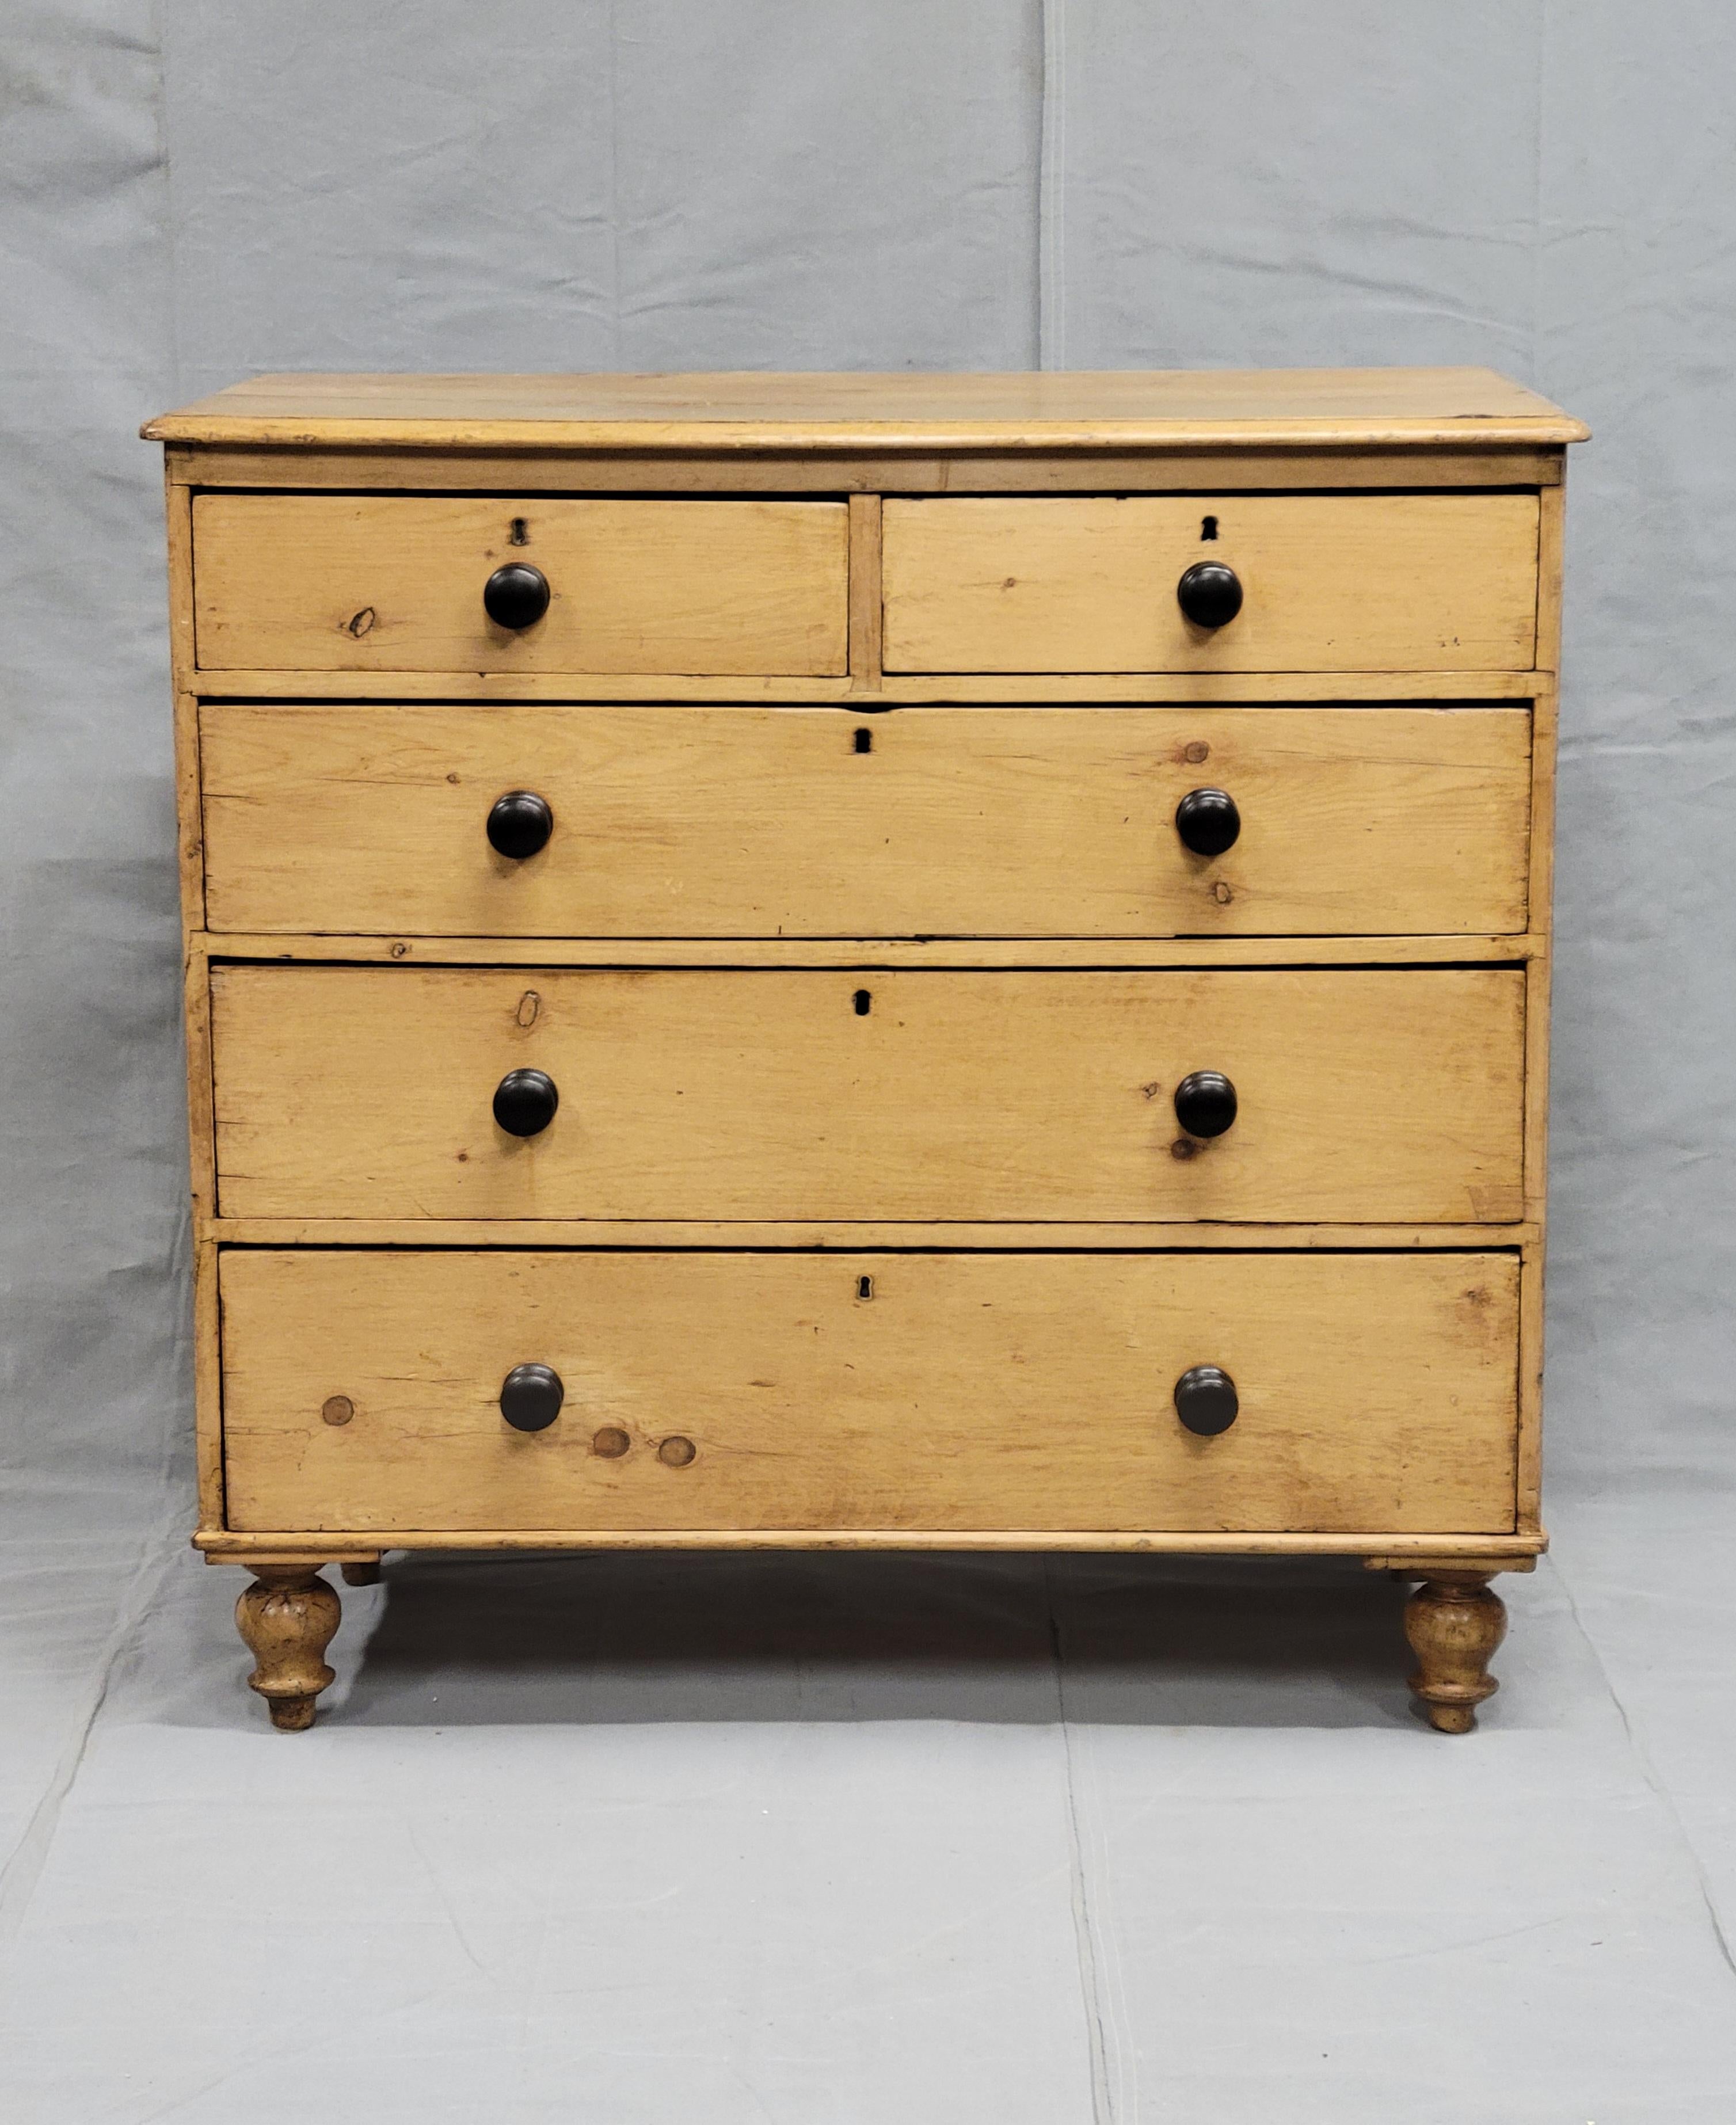 This Antique English Edwardian chest of drawers made of scrubbed pine sits on turnip feet and is a unique addition to your home decor. The dresser has 5 spacious drawers that can hold all your essentials, and its 41in length, 40in height, and 20in